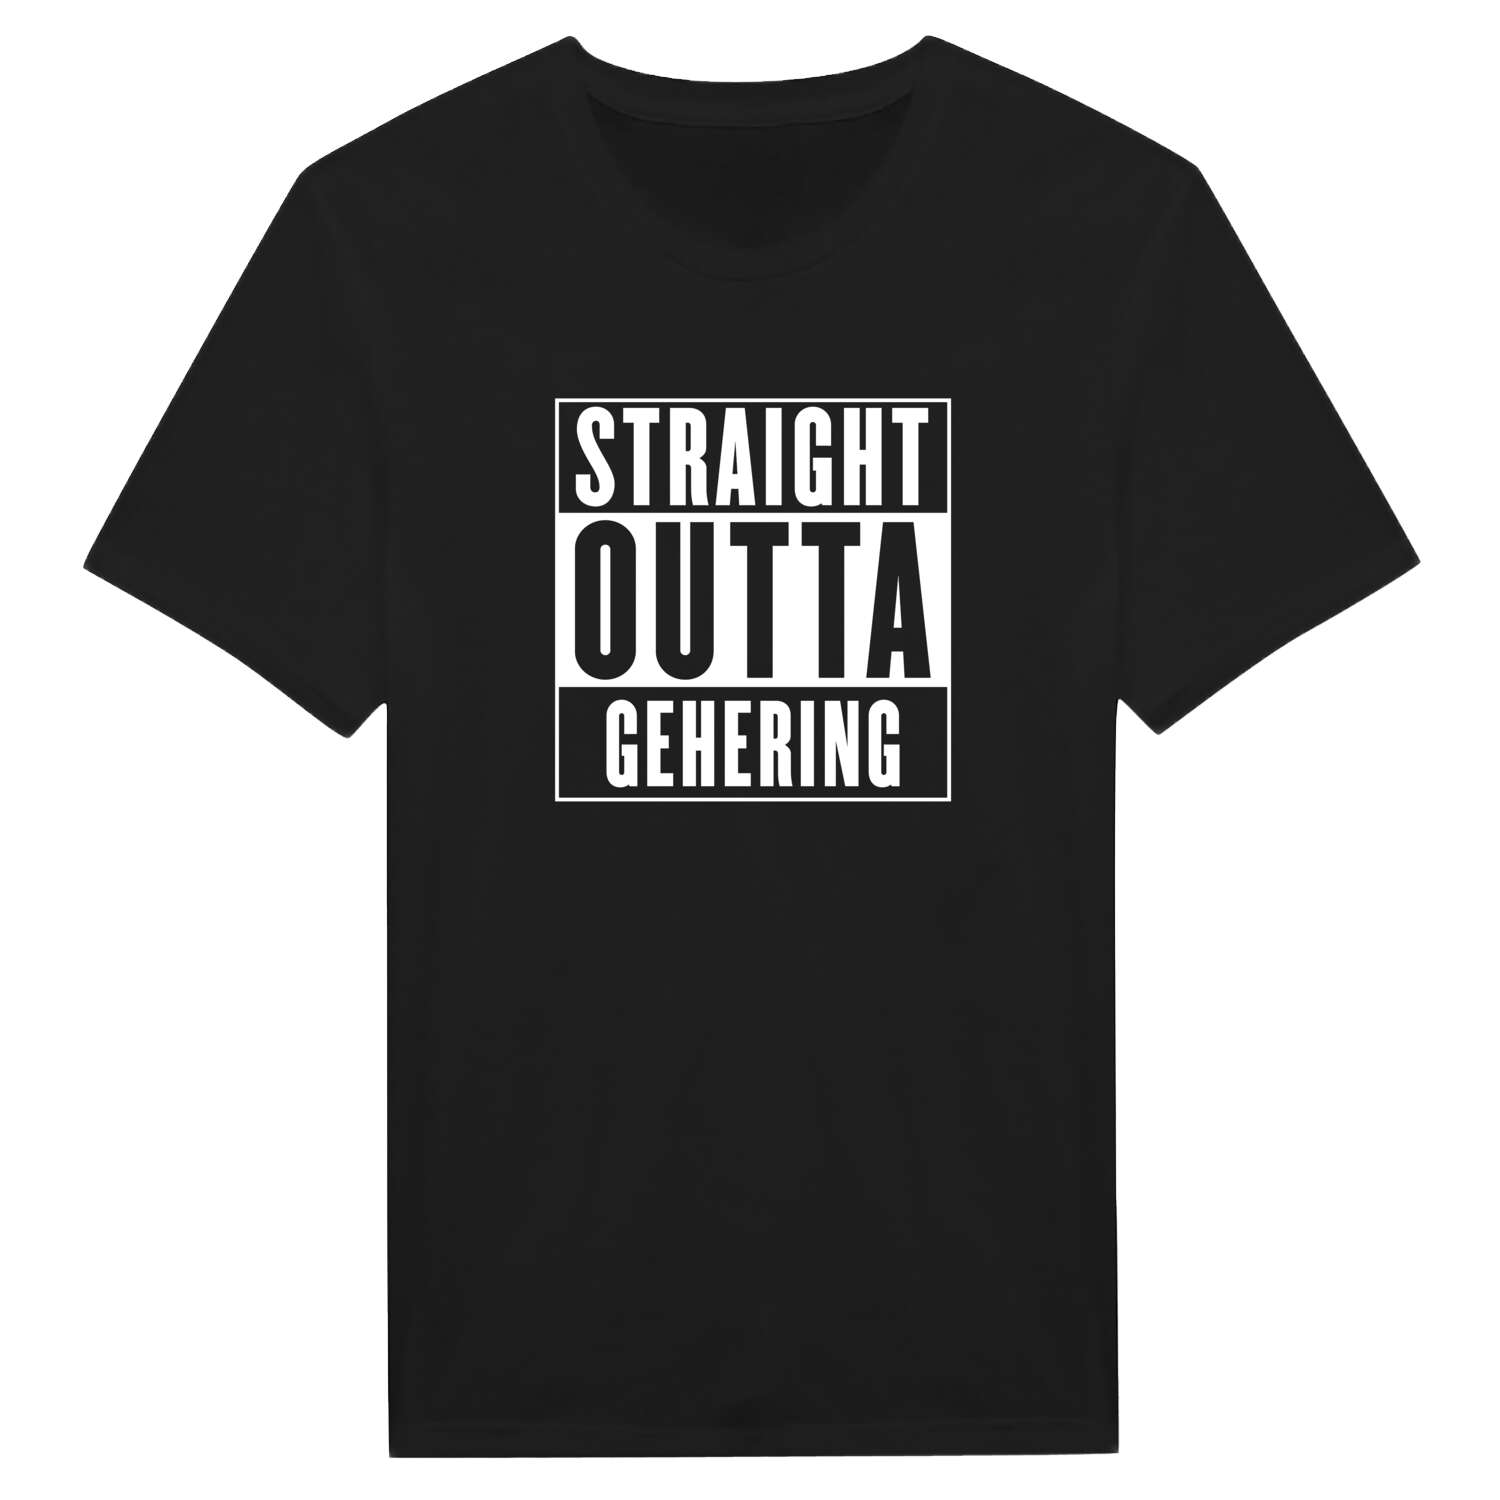 Gehering T-Shirt »Straight Outta«